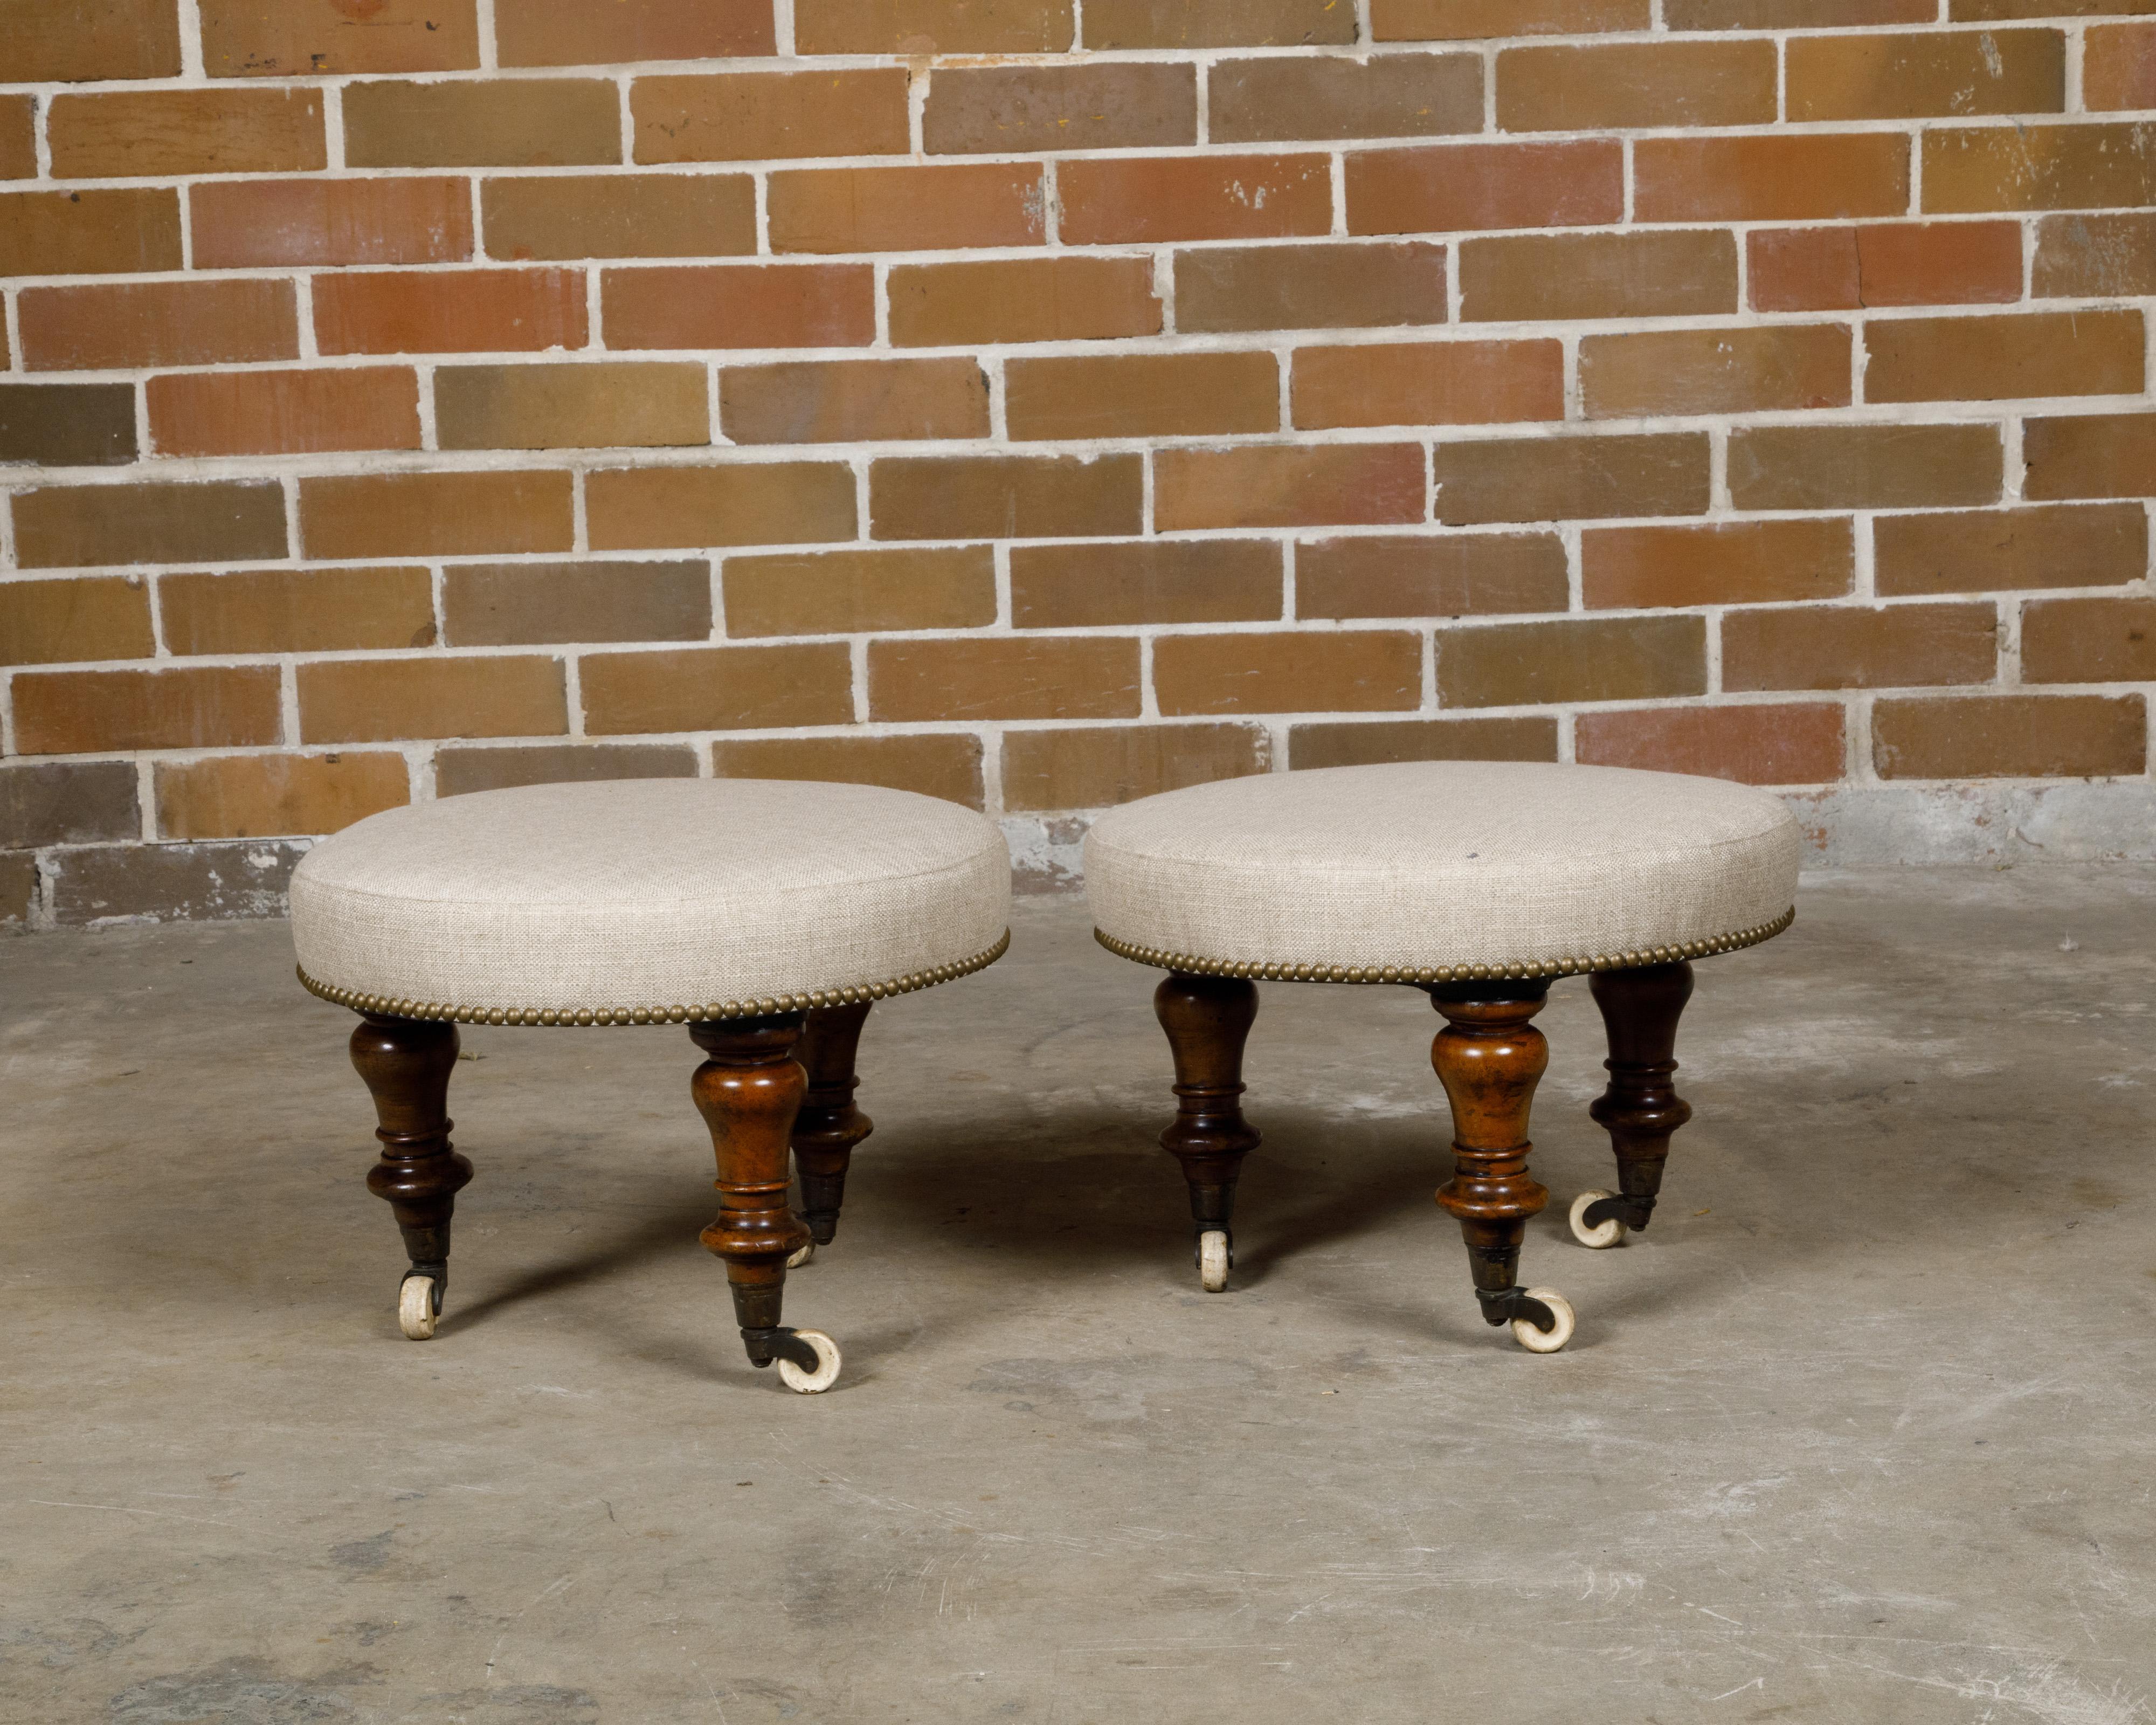 Upholstery Pair of English Mahogany Stools with 19th Century Turned Legs on Casters For Sale